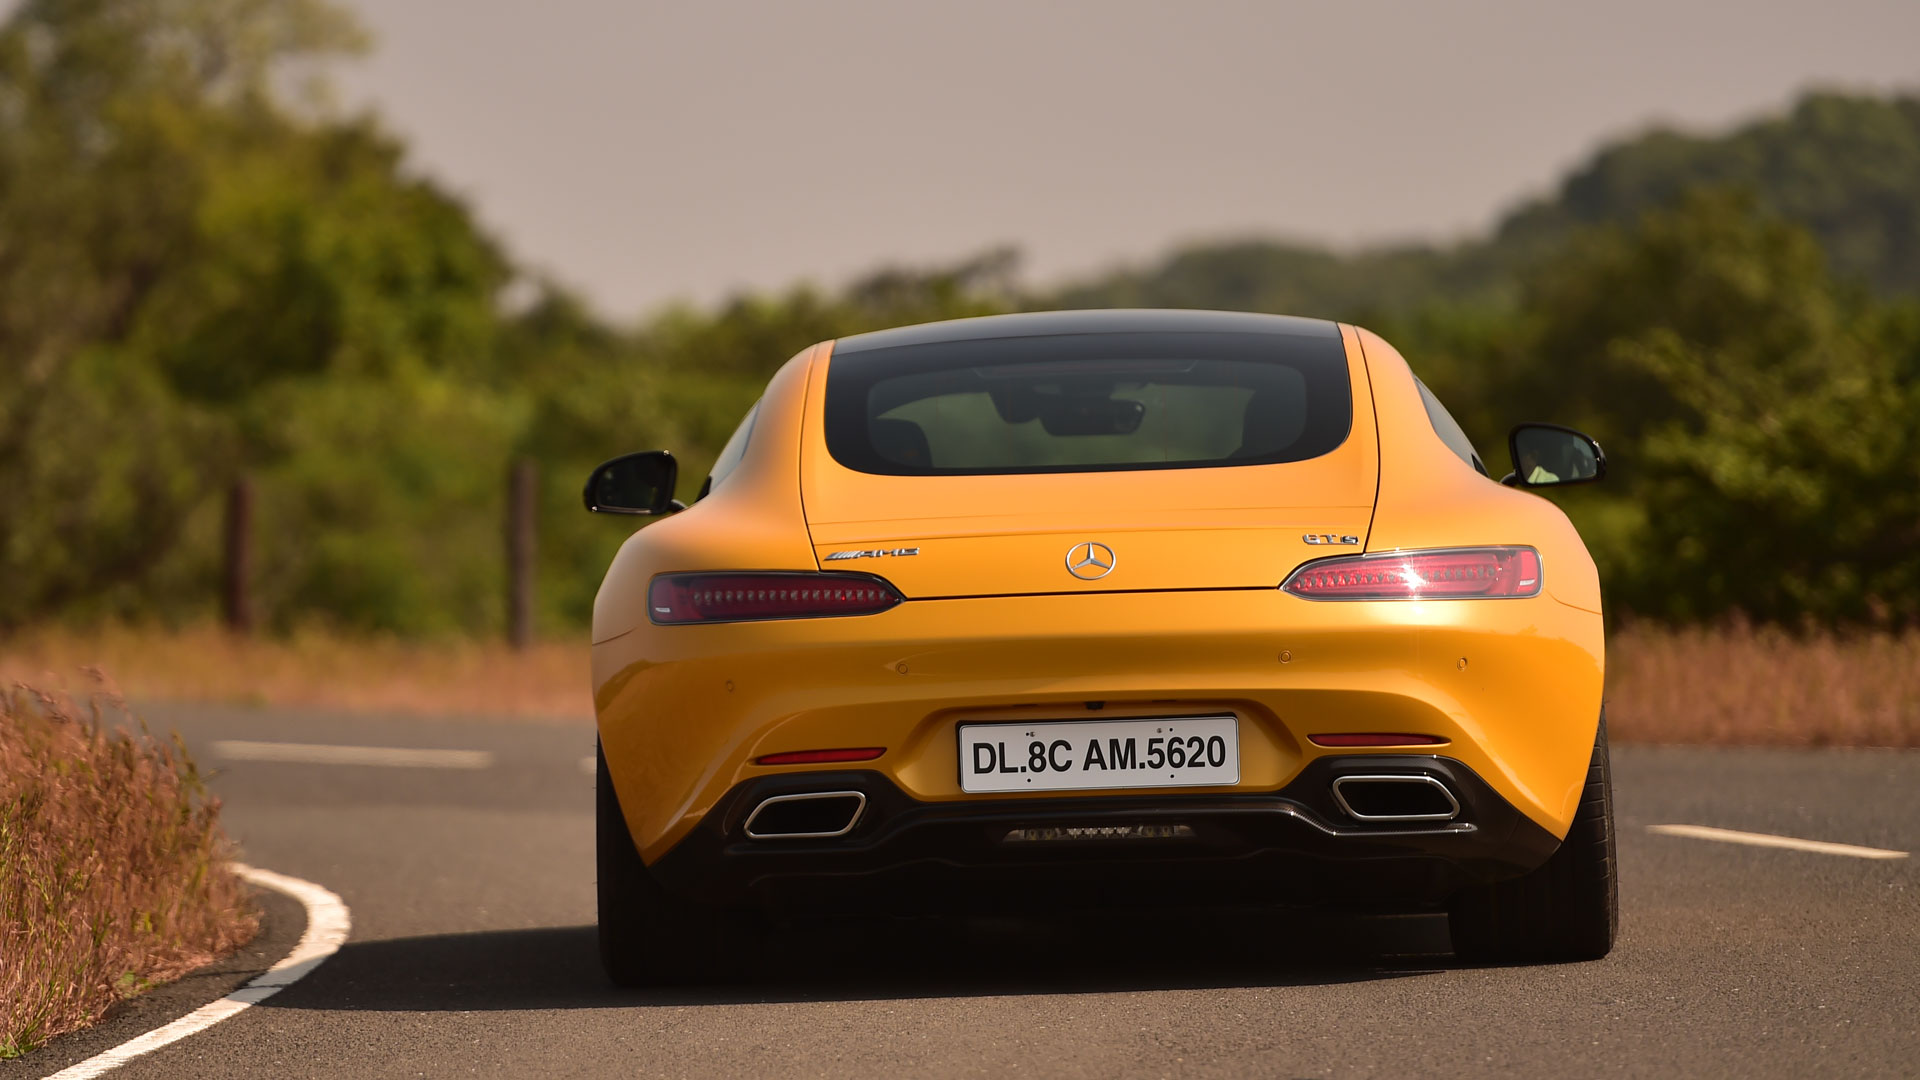 Mercedes benz AMG GT 2015 S Compare